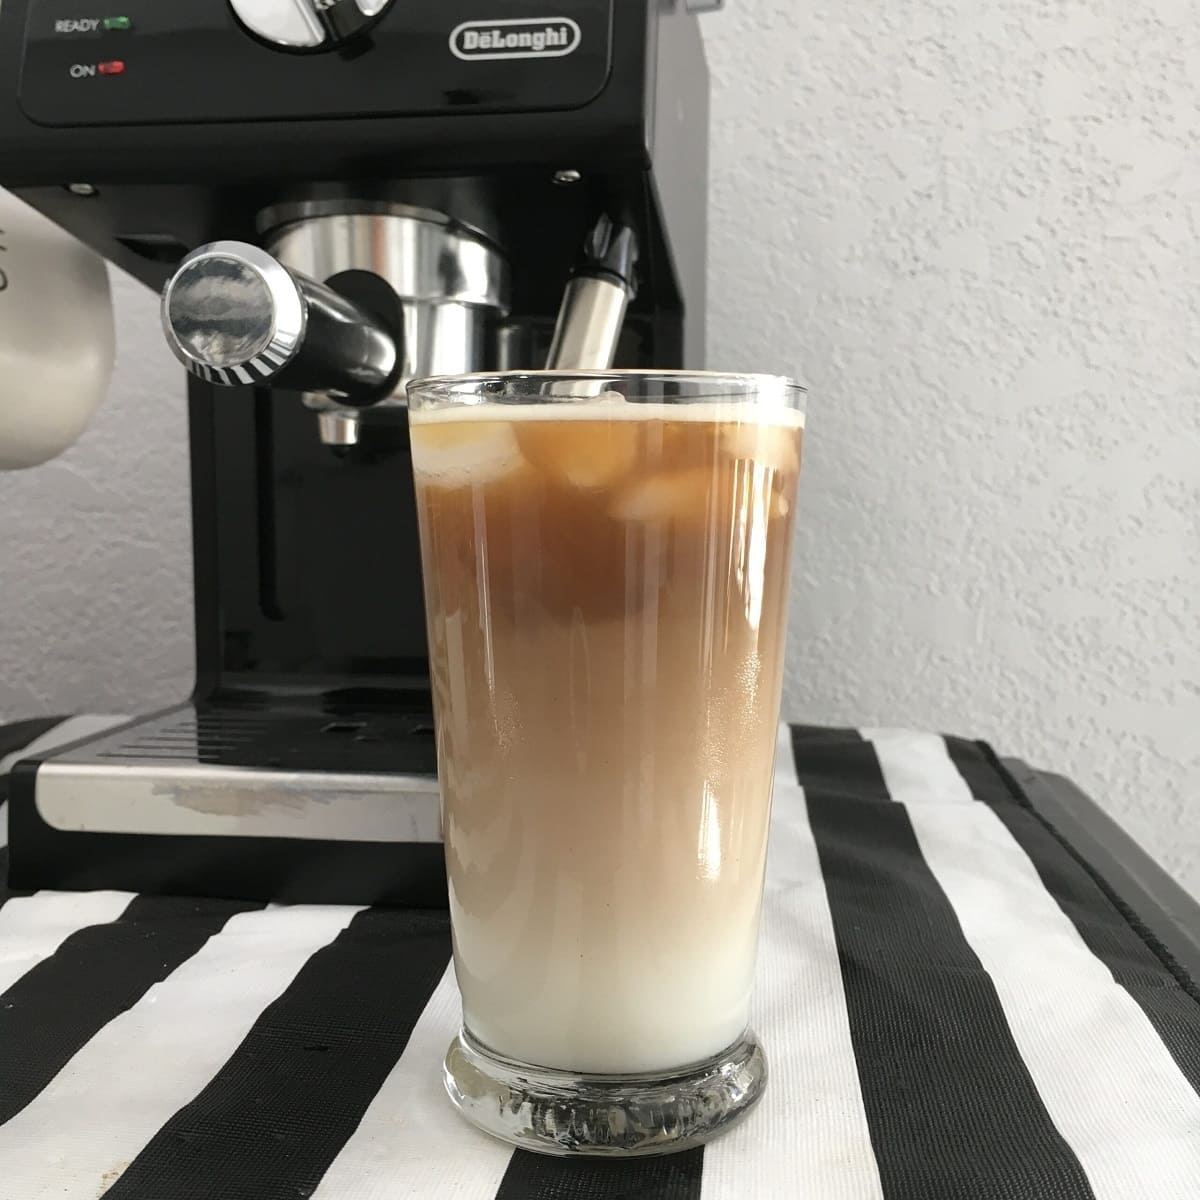 How To Make A Vanilla Latte With An Espresso Machine